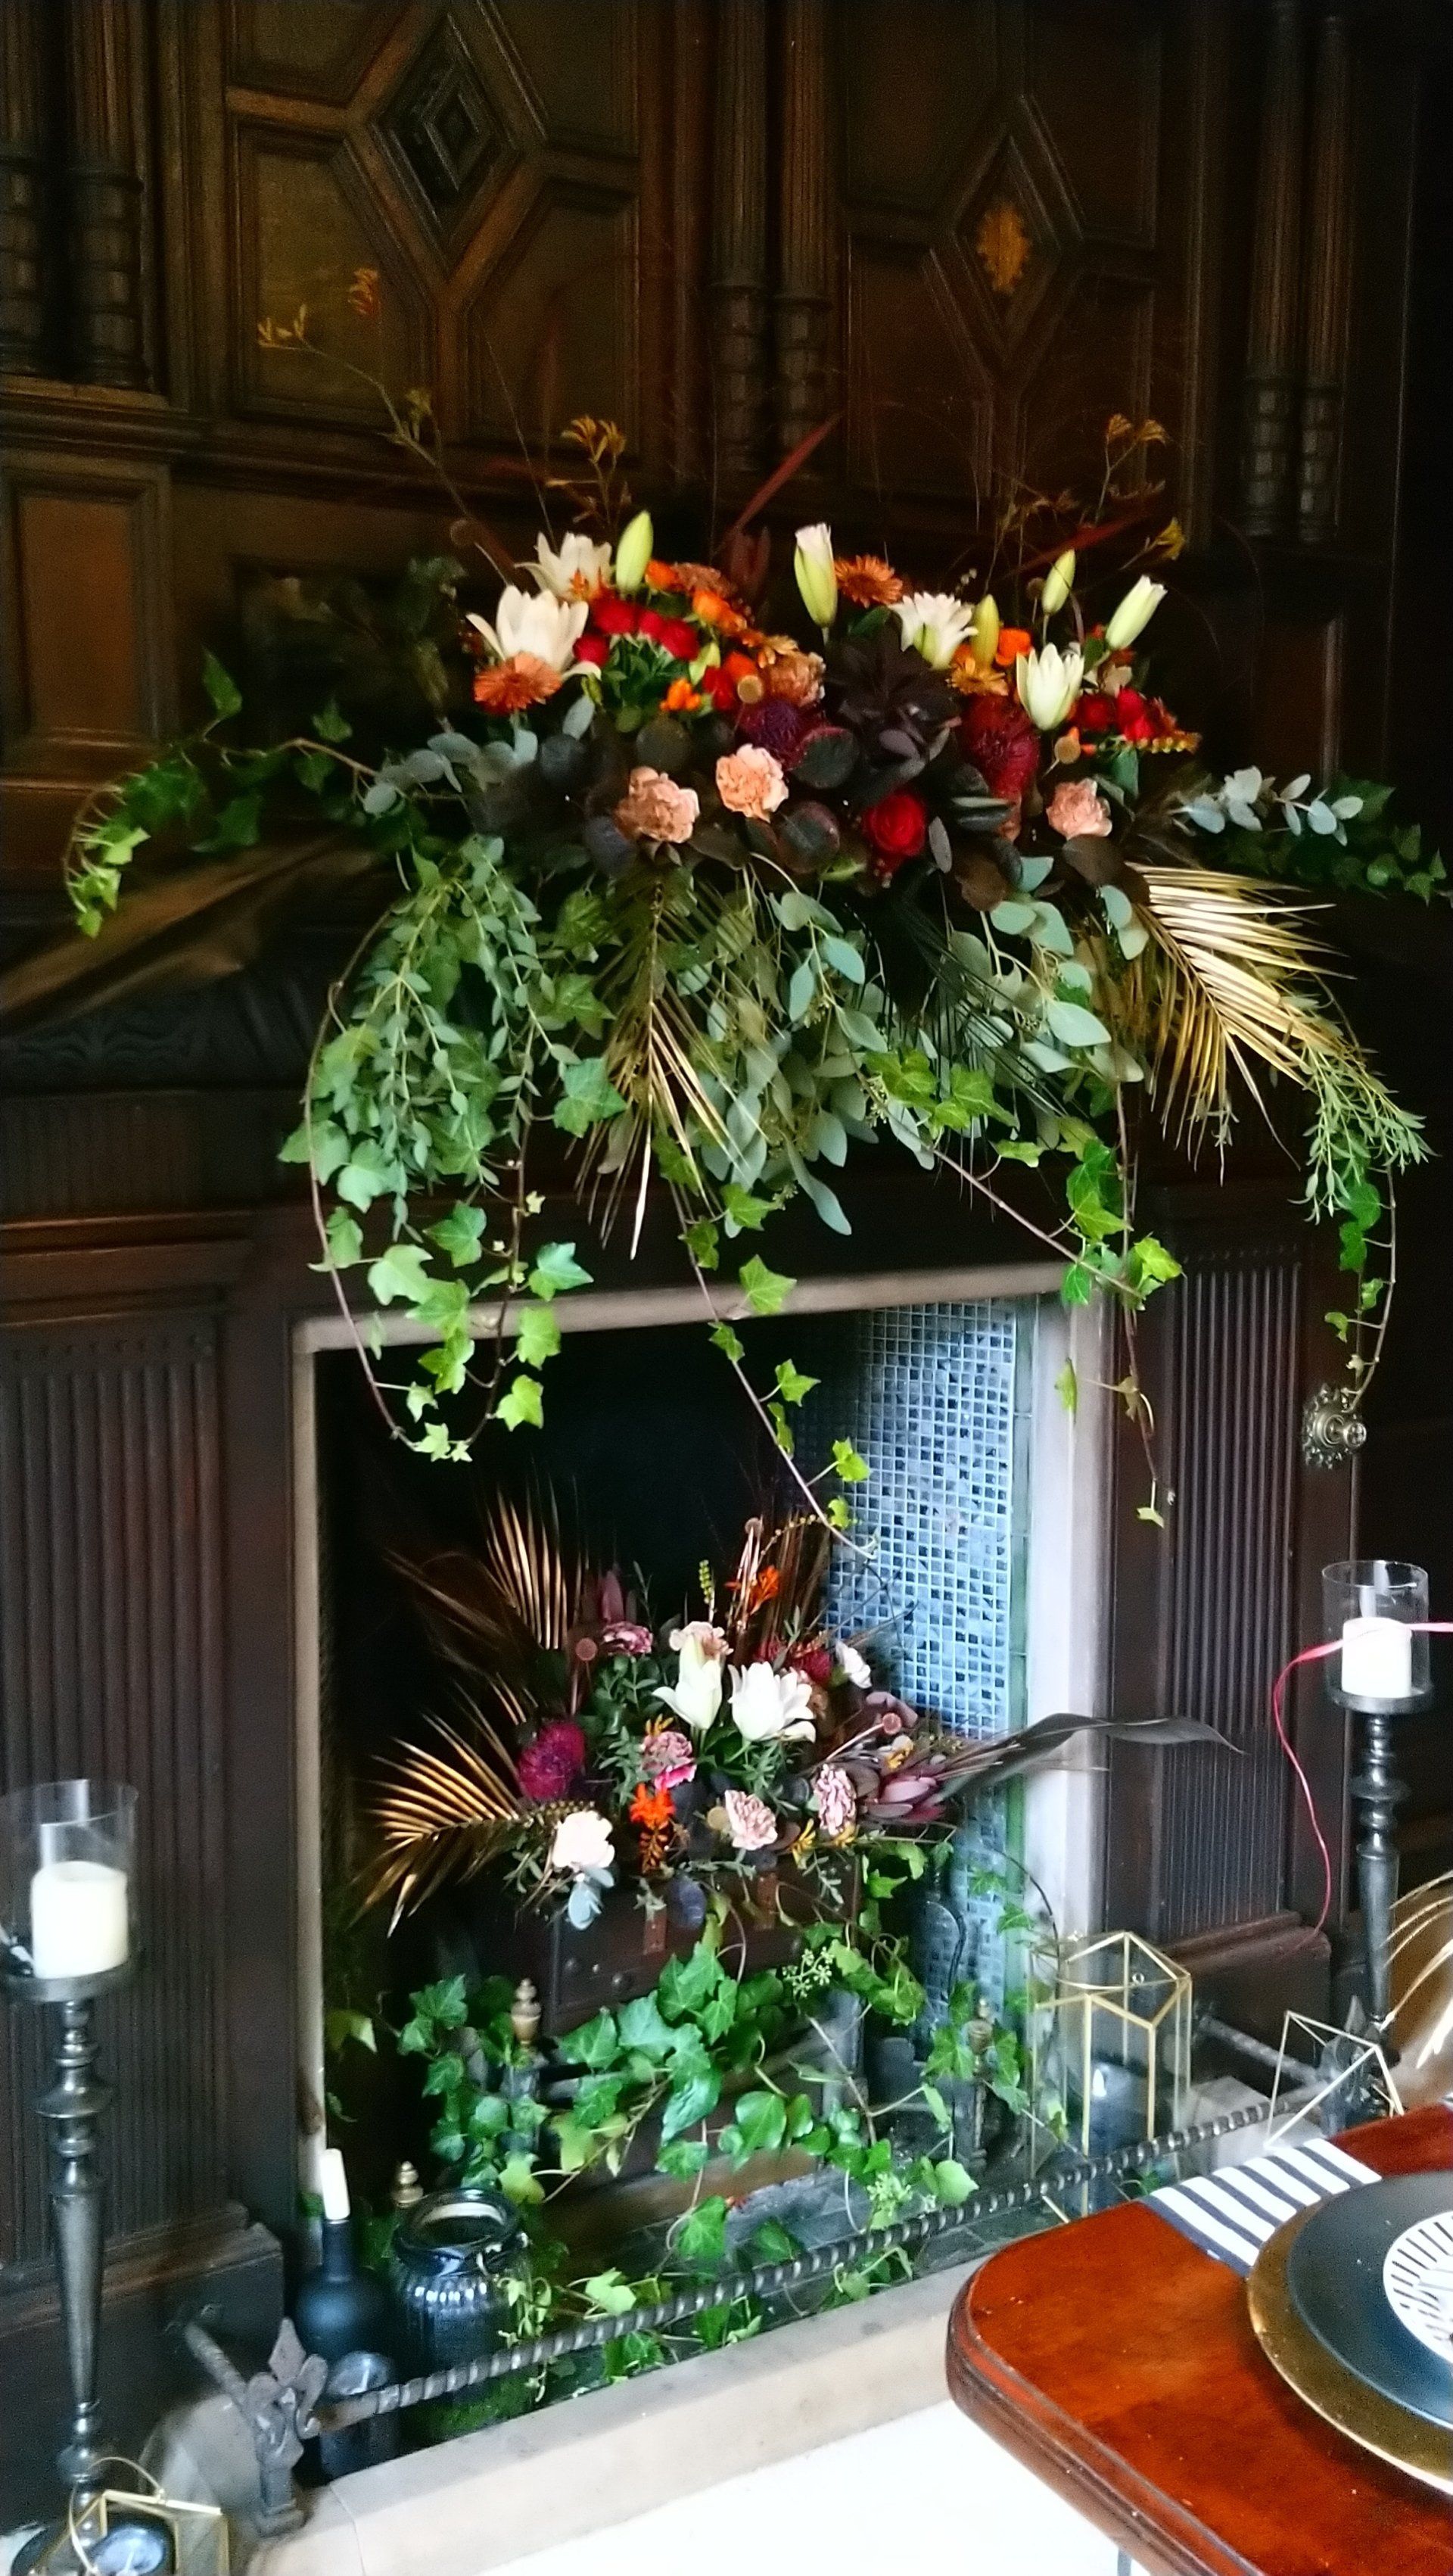 Gothic Fireplace flowers